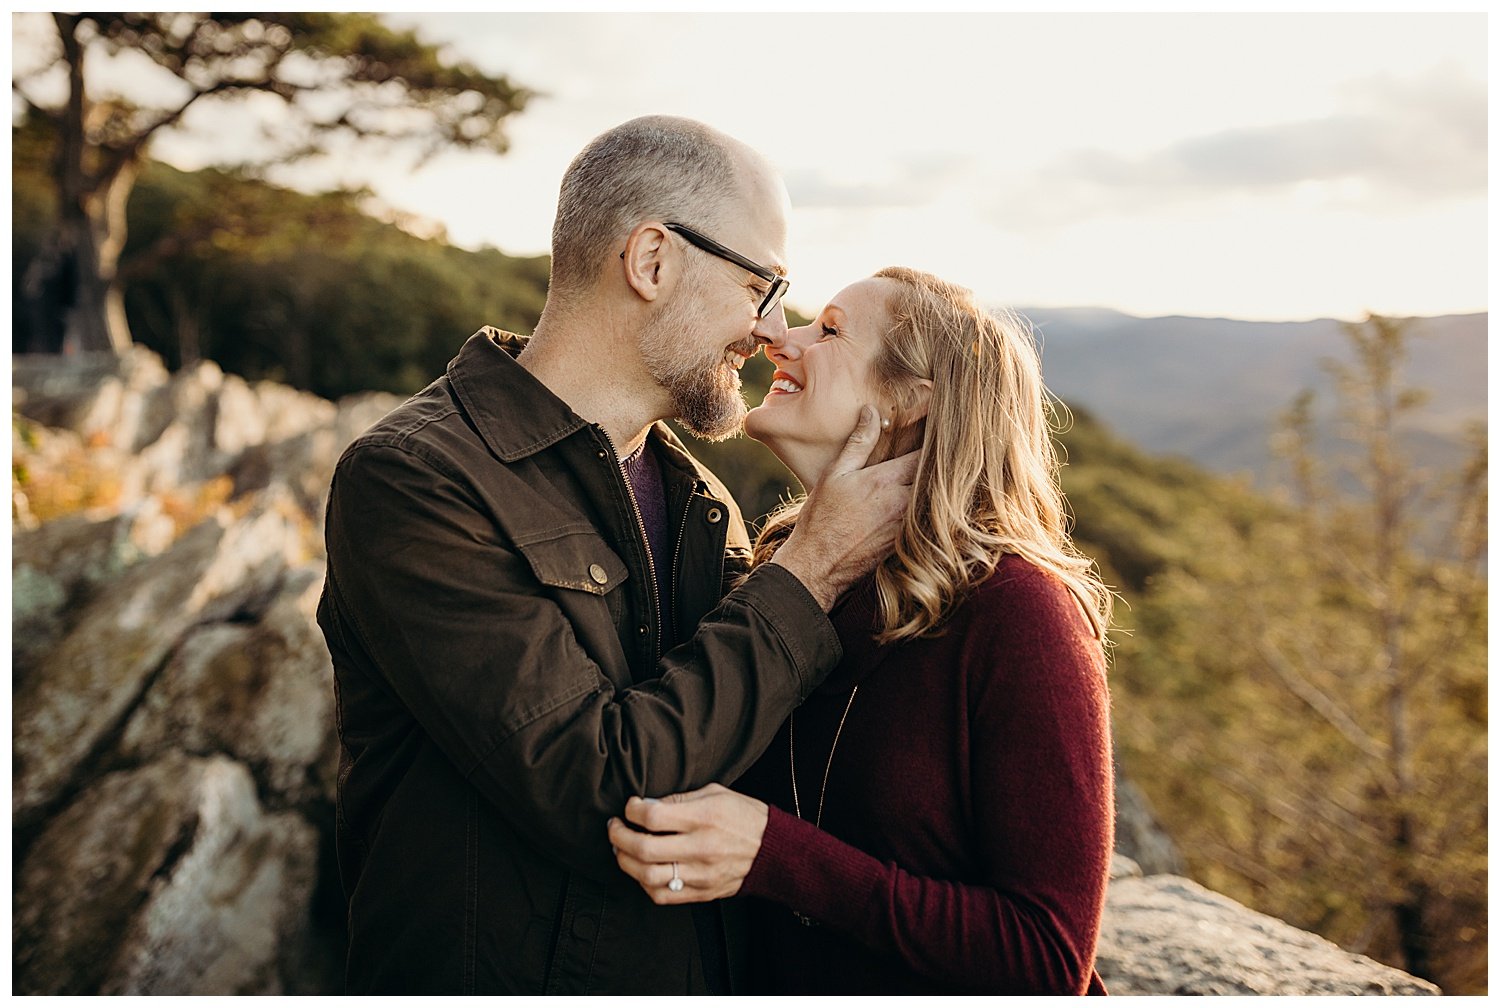  Blue Ridge Mountain Engagement Session in Virginia at Golden Hour Sunset 